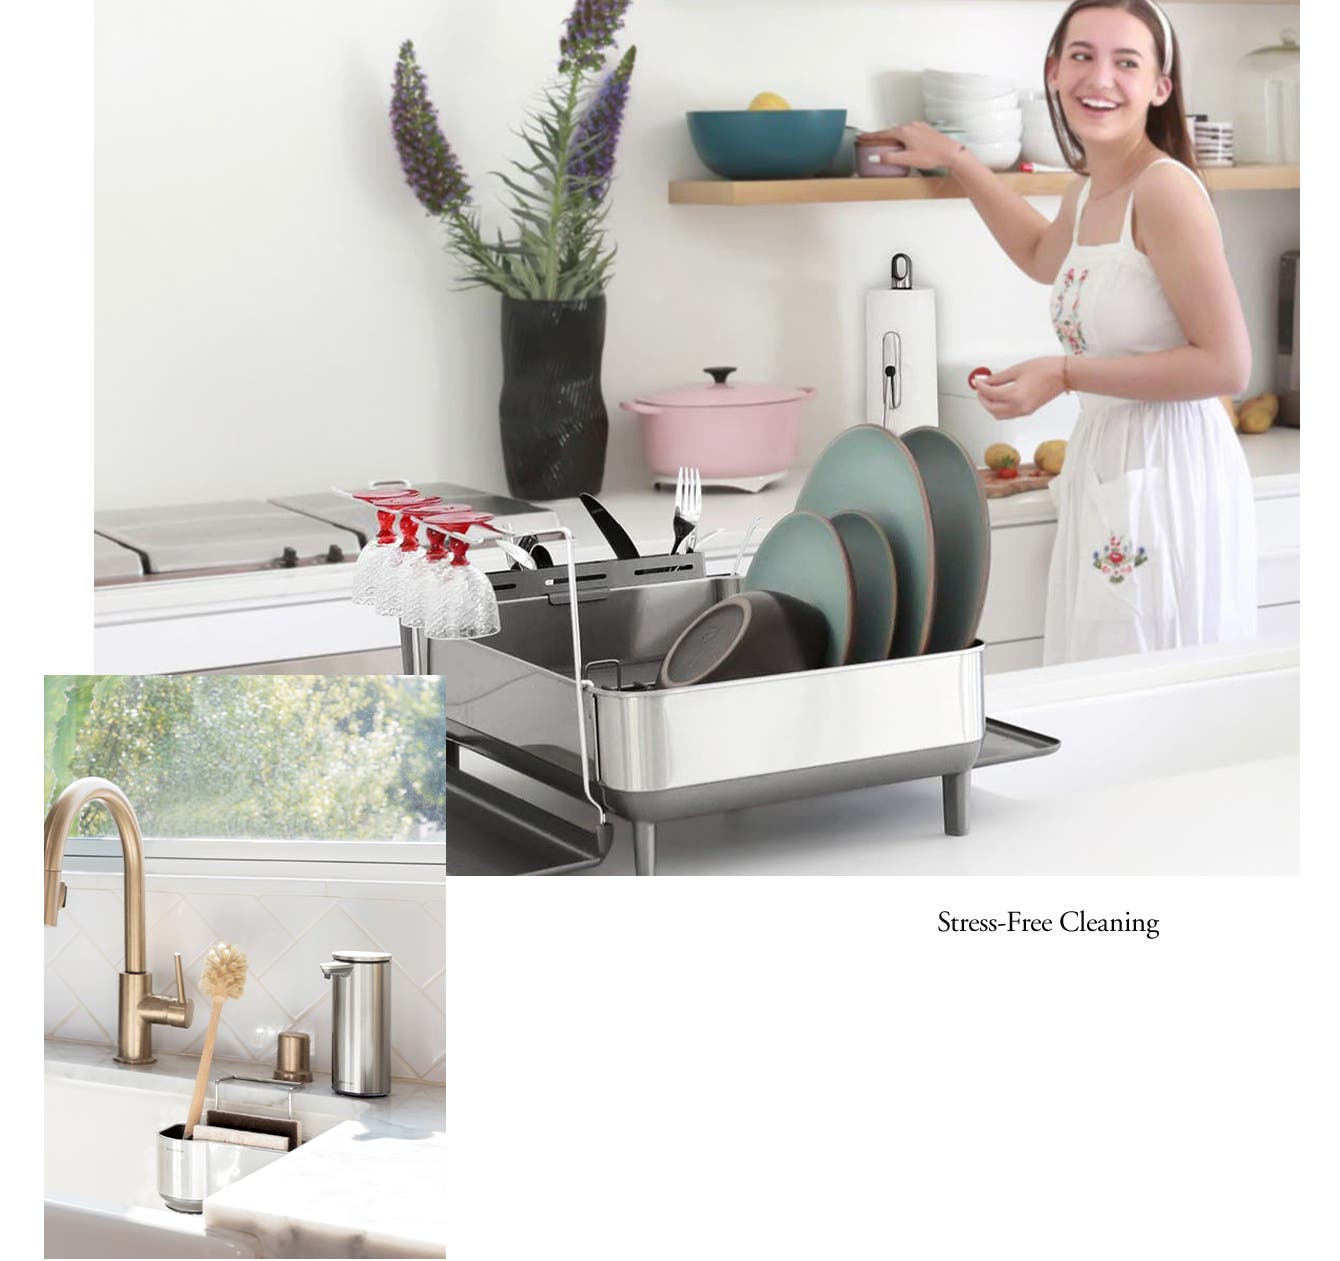 Stress-free cleaning. Woman organizing a kitchen counter with a modern dish rack; inset of a kitchen sink with cleaning tools.